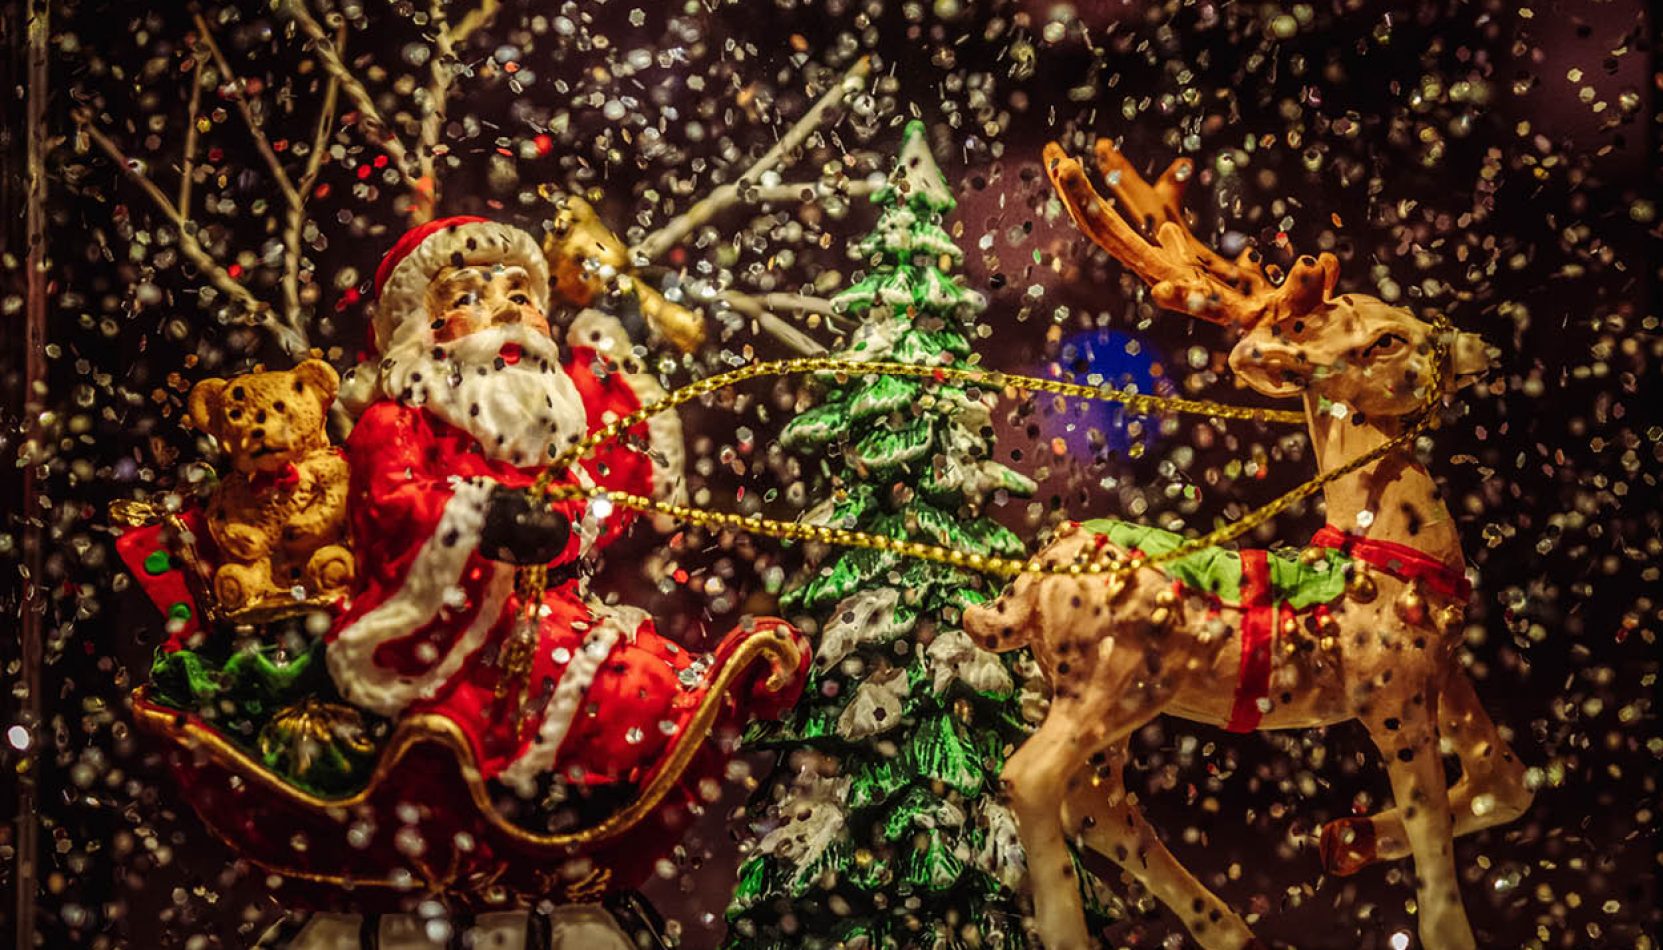 santa stop here, guide to surrey, guide to whats on, what's on, guide to whats on this christmas, where to find santa, christmas shows, desperately seeking santa, christmas events, things to do with the kids this christmas, family, family christmas events